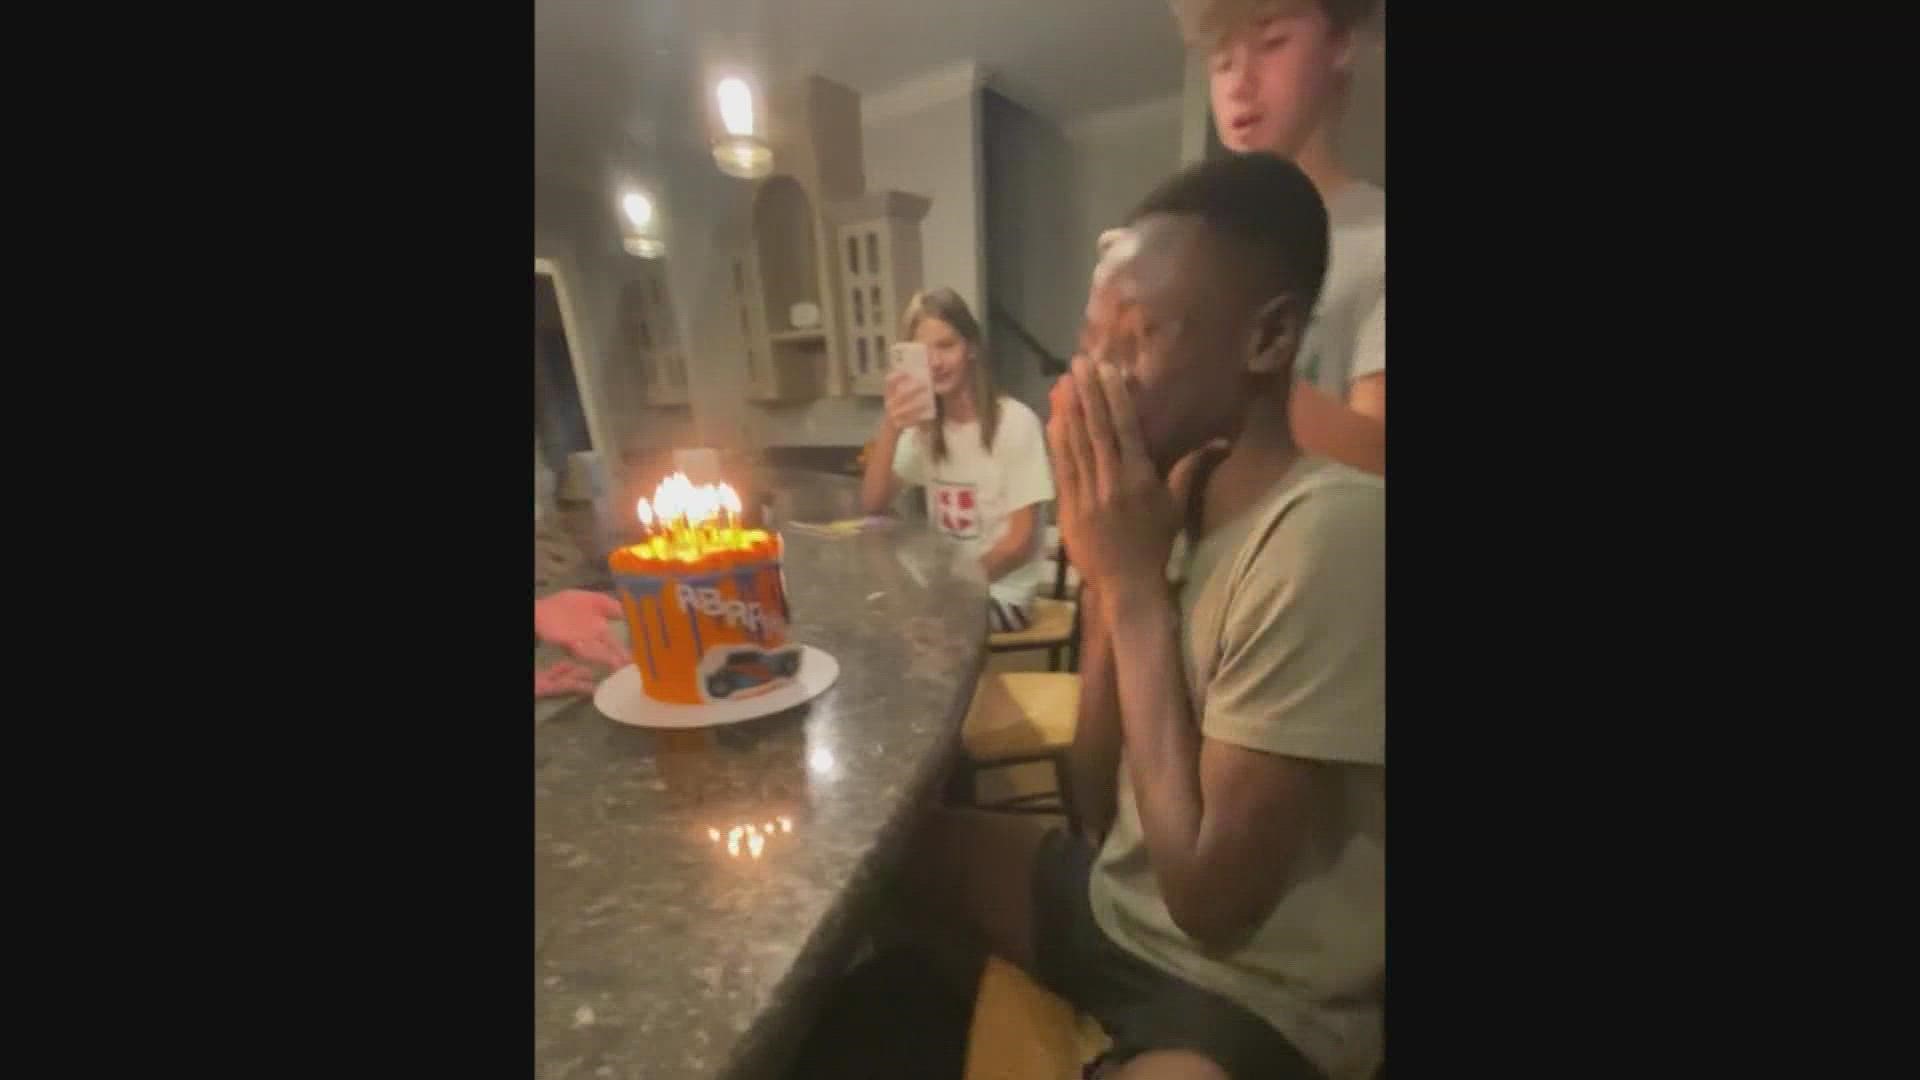 Abraham had never celebrated or knew it was his birthday. His adopted family got him a cake and sang him 'Happy Birthday' and it brought him to tears.